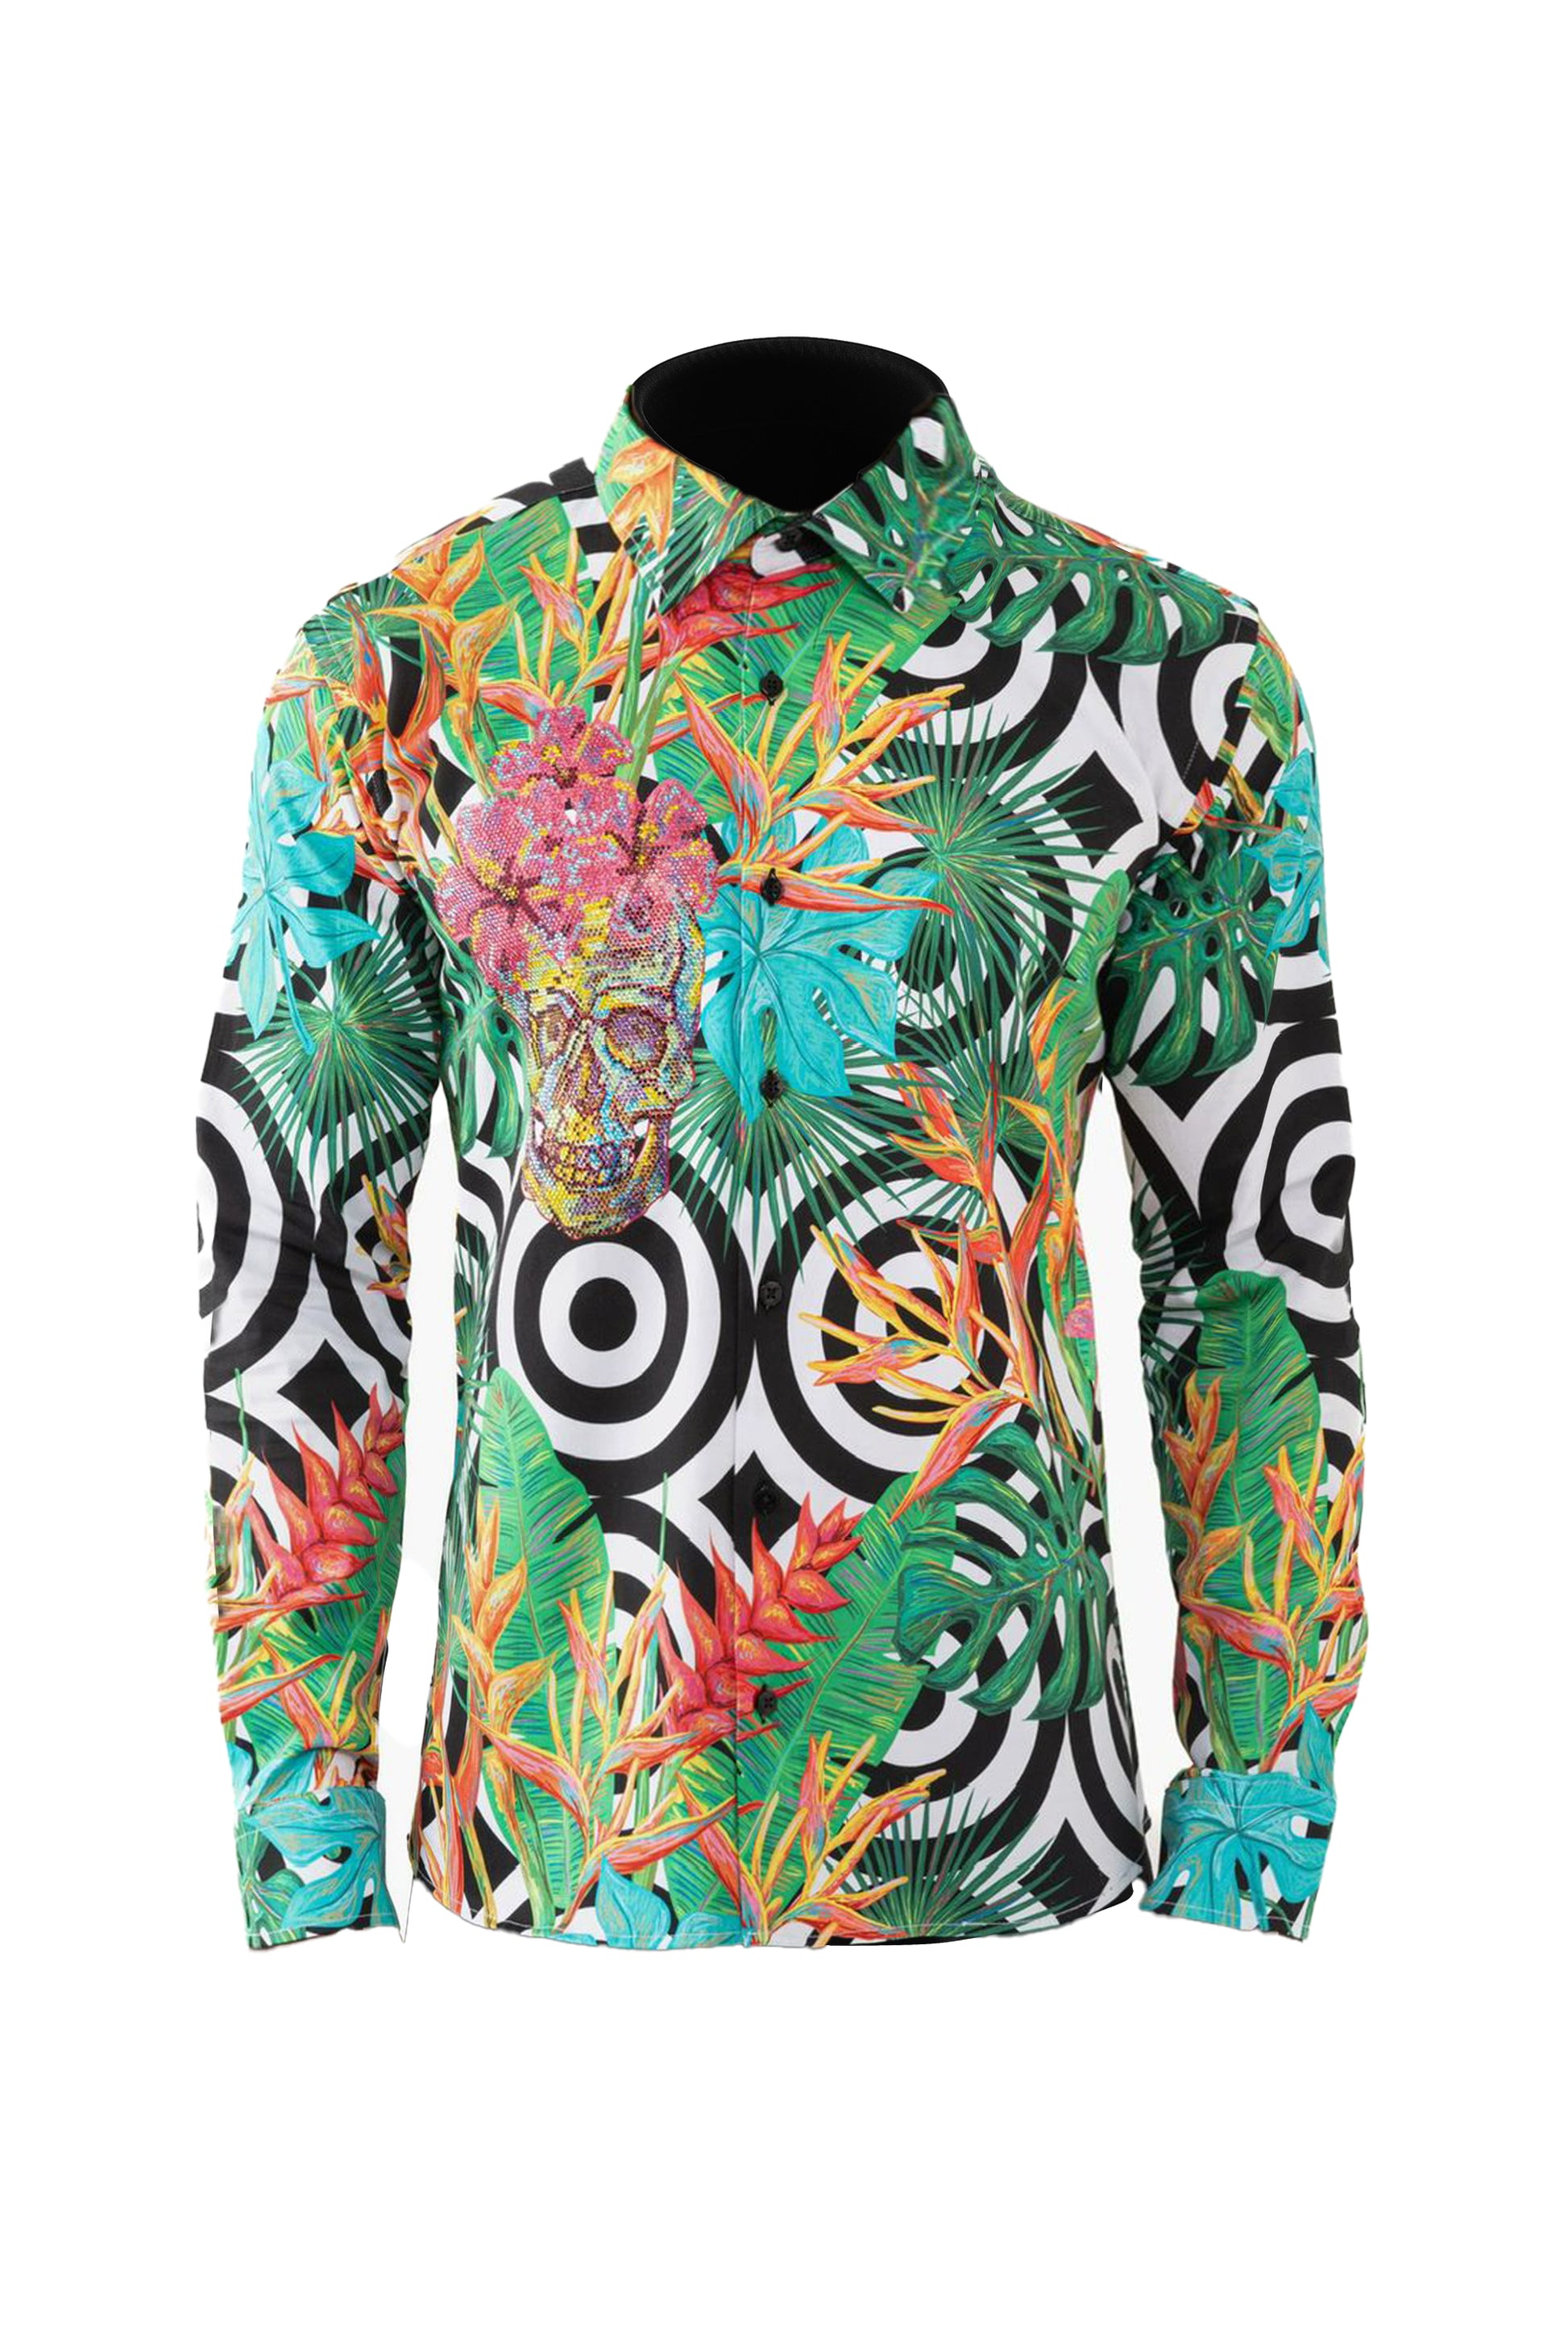 Tropical Visionary Cotton Men's Casual Shirt CASUAL SHIRT On Sale 30% Off Vercini